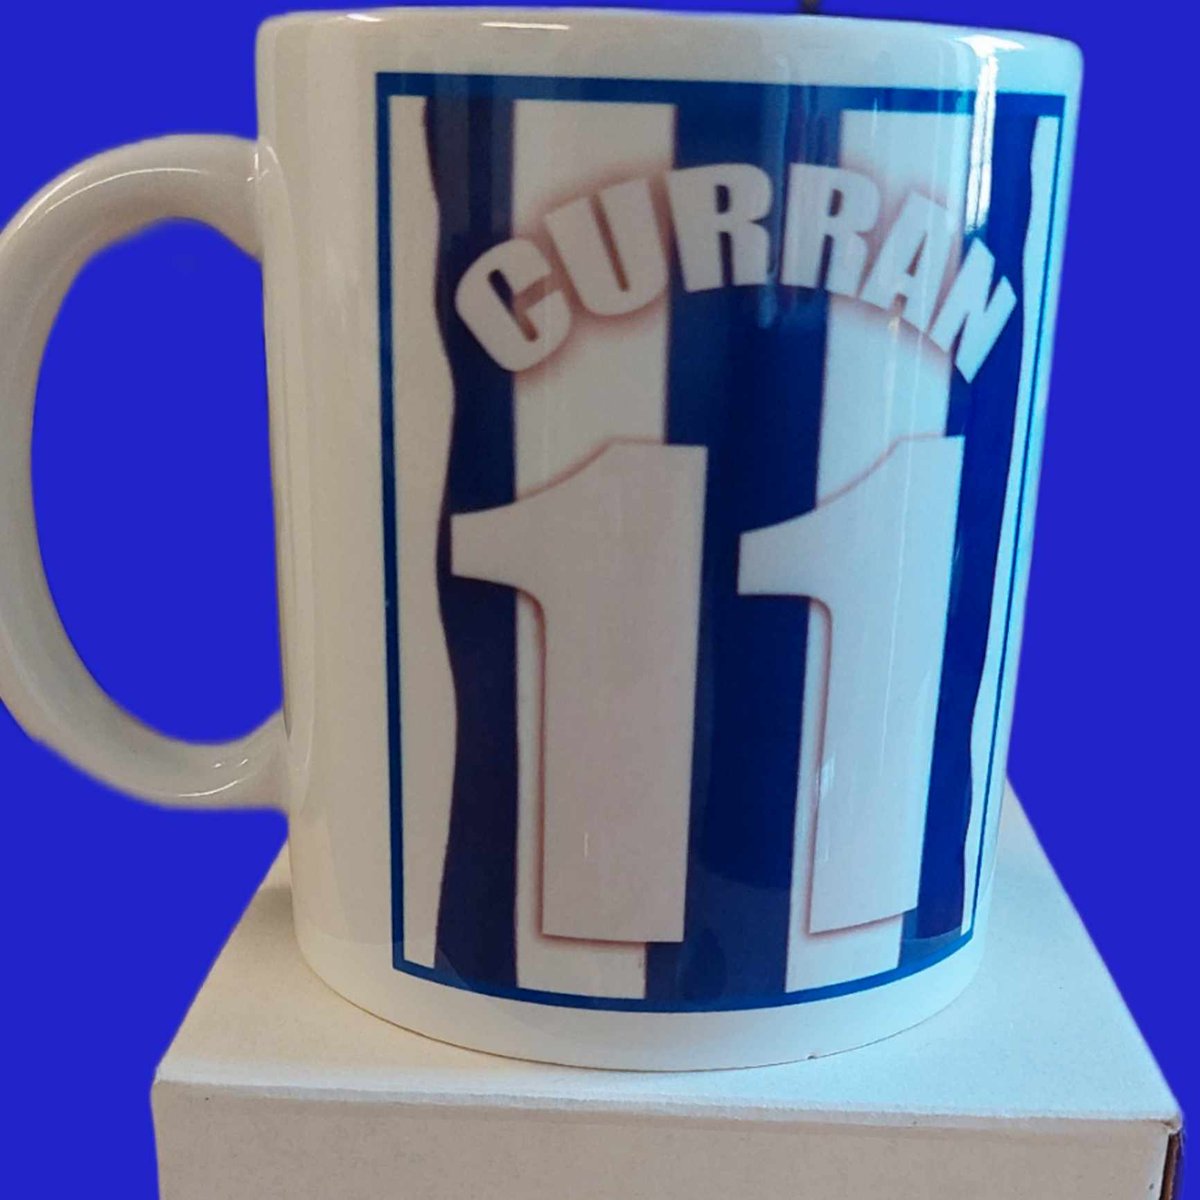 New @Curran_Terry11 mugs out now perch the merch at srbmedia.co.uk/shop #terrycurran #srbmedia